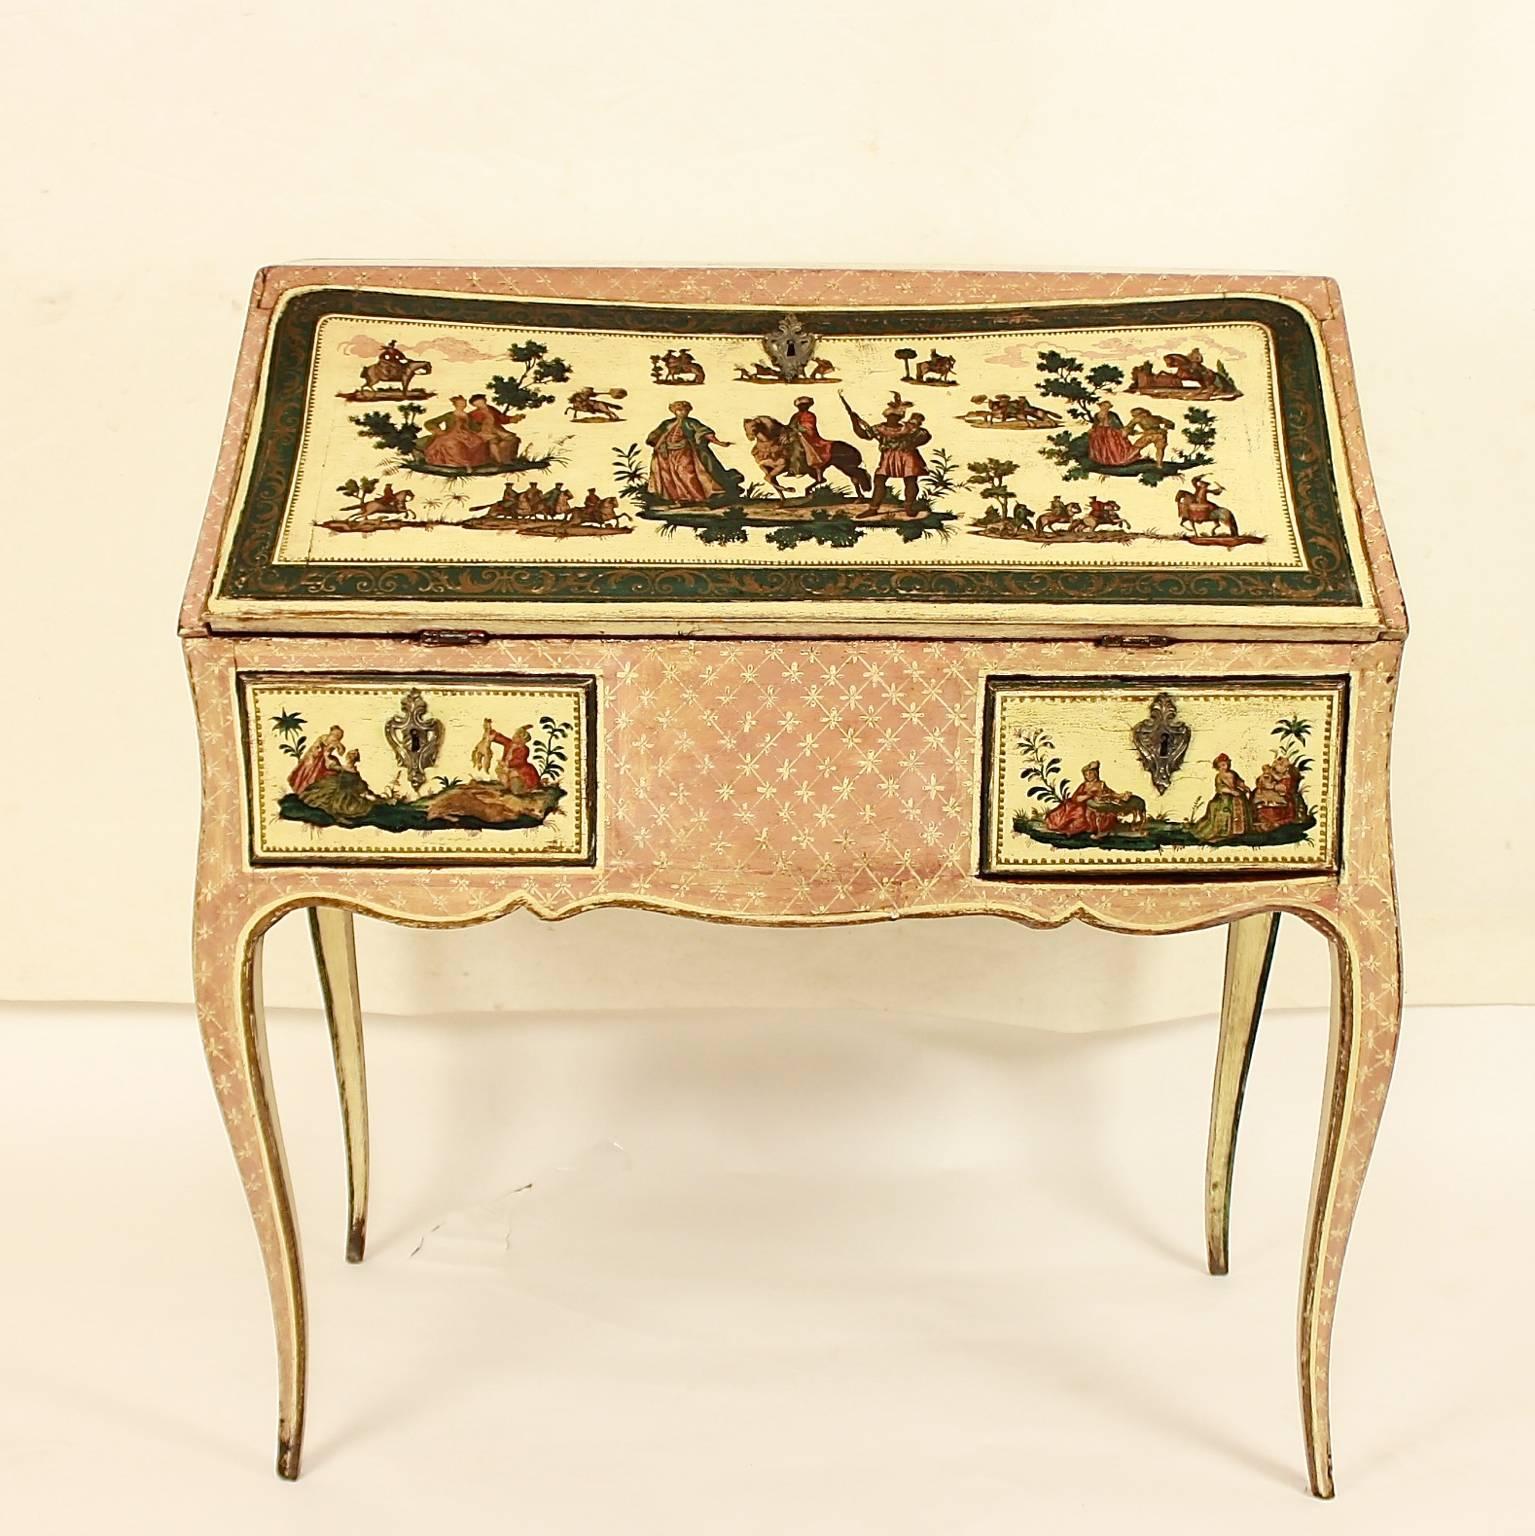 A rare mid-18th century Lacca Povera desk or bureau, profusely decorated with decoupage vignettes on the fall front, the sides and the two drawers. Each panel is enclosed by a running floral design on a dark blue ground. The panels depict orientally